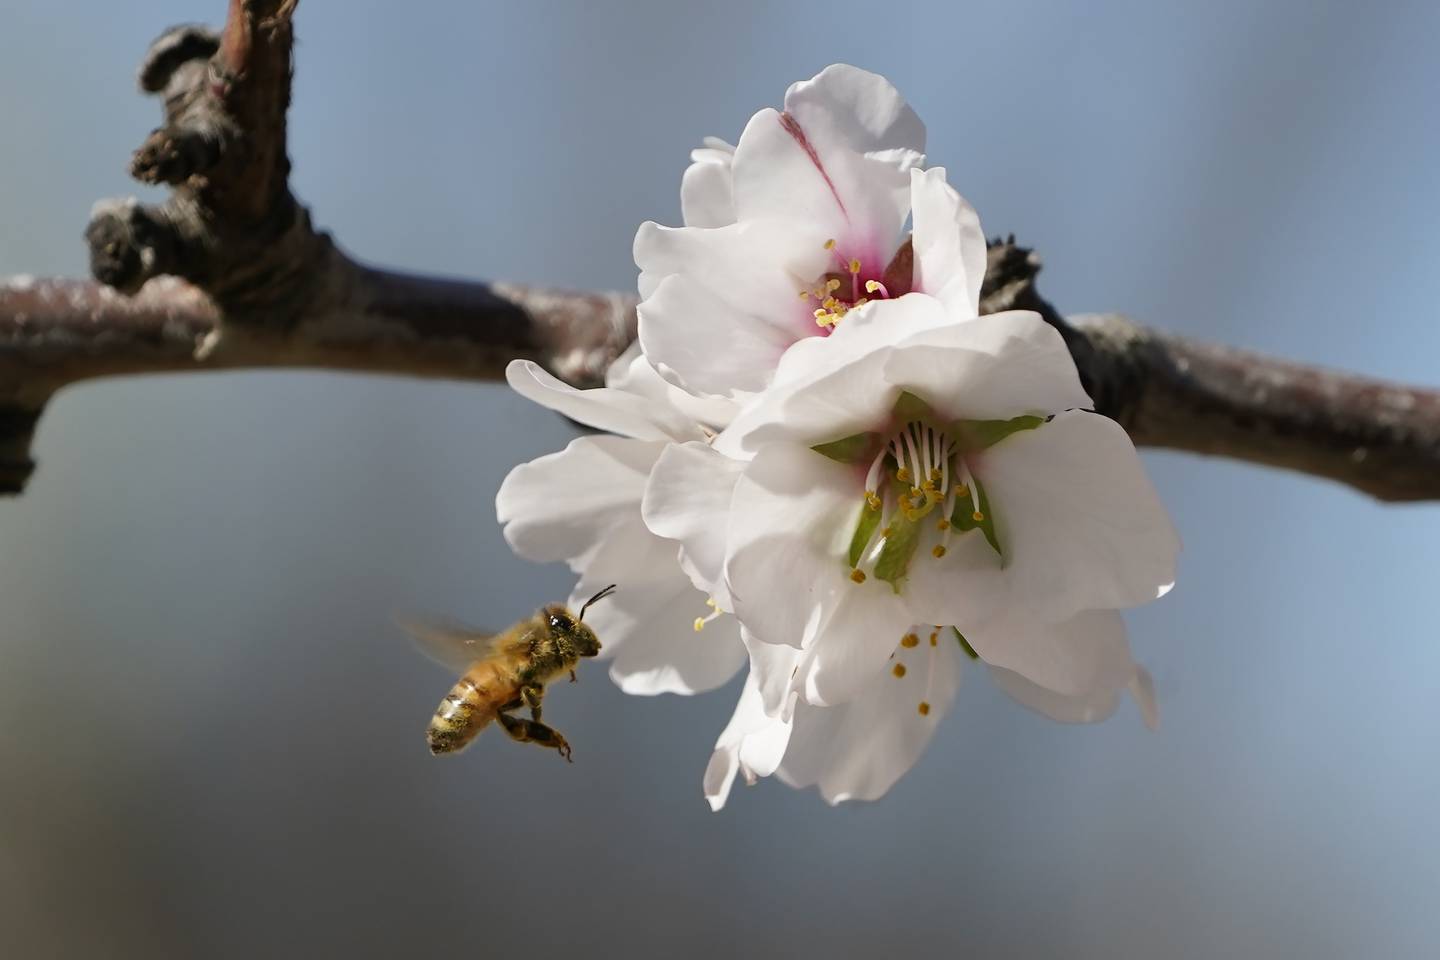 A bee approaches an almond blossom in an orchard near Woodland, California.